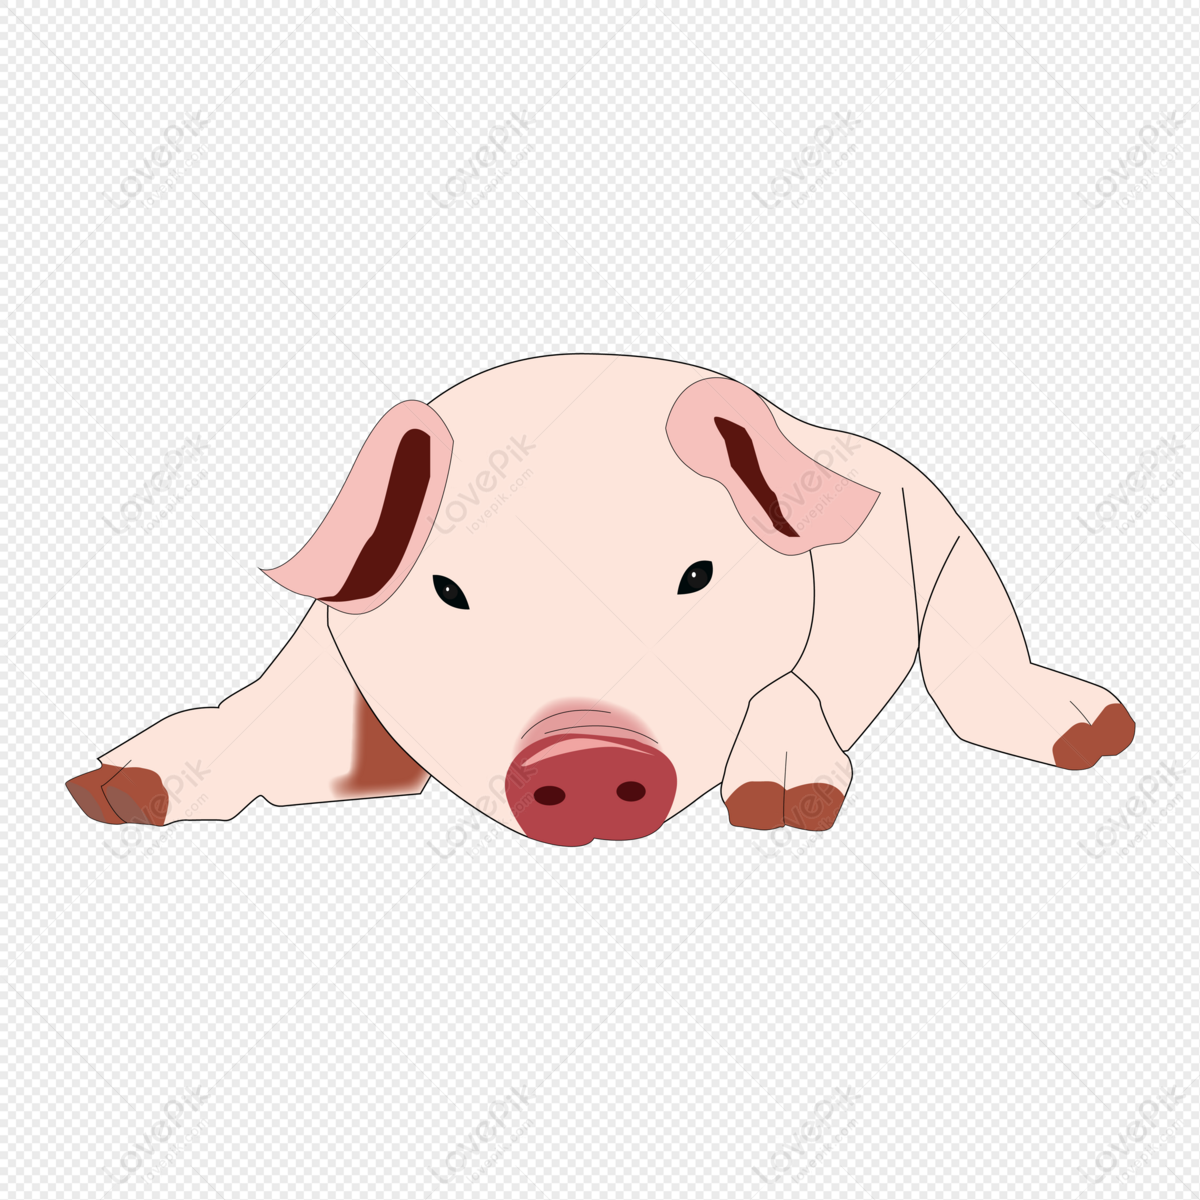 Cute Cartoon Hand Drawn Animal Squatting Pig PNG Transparent And Clipart  Image For Free Download - Lovepik | 401409996